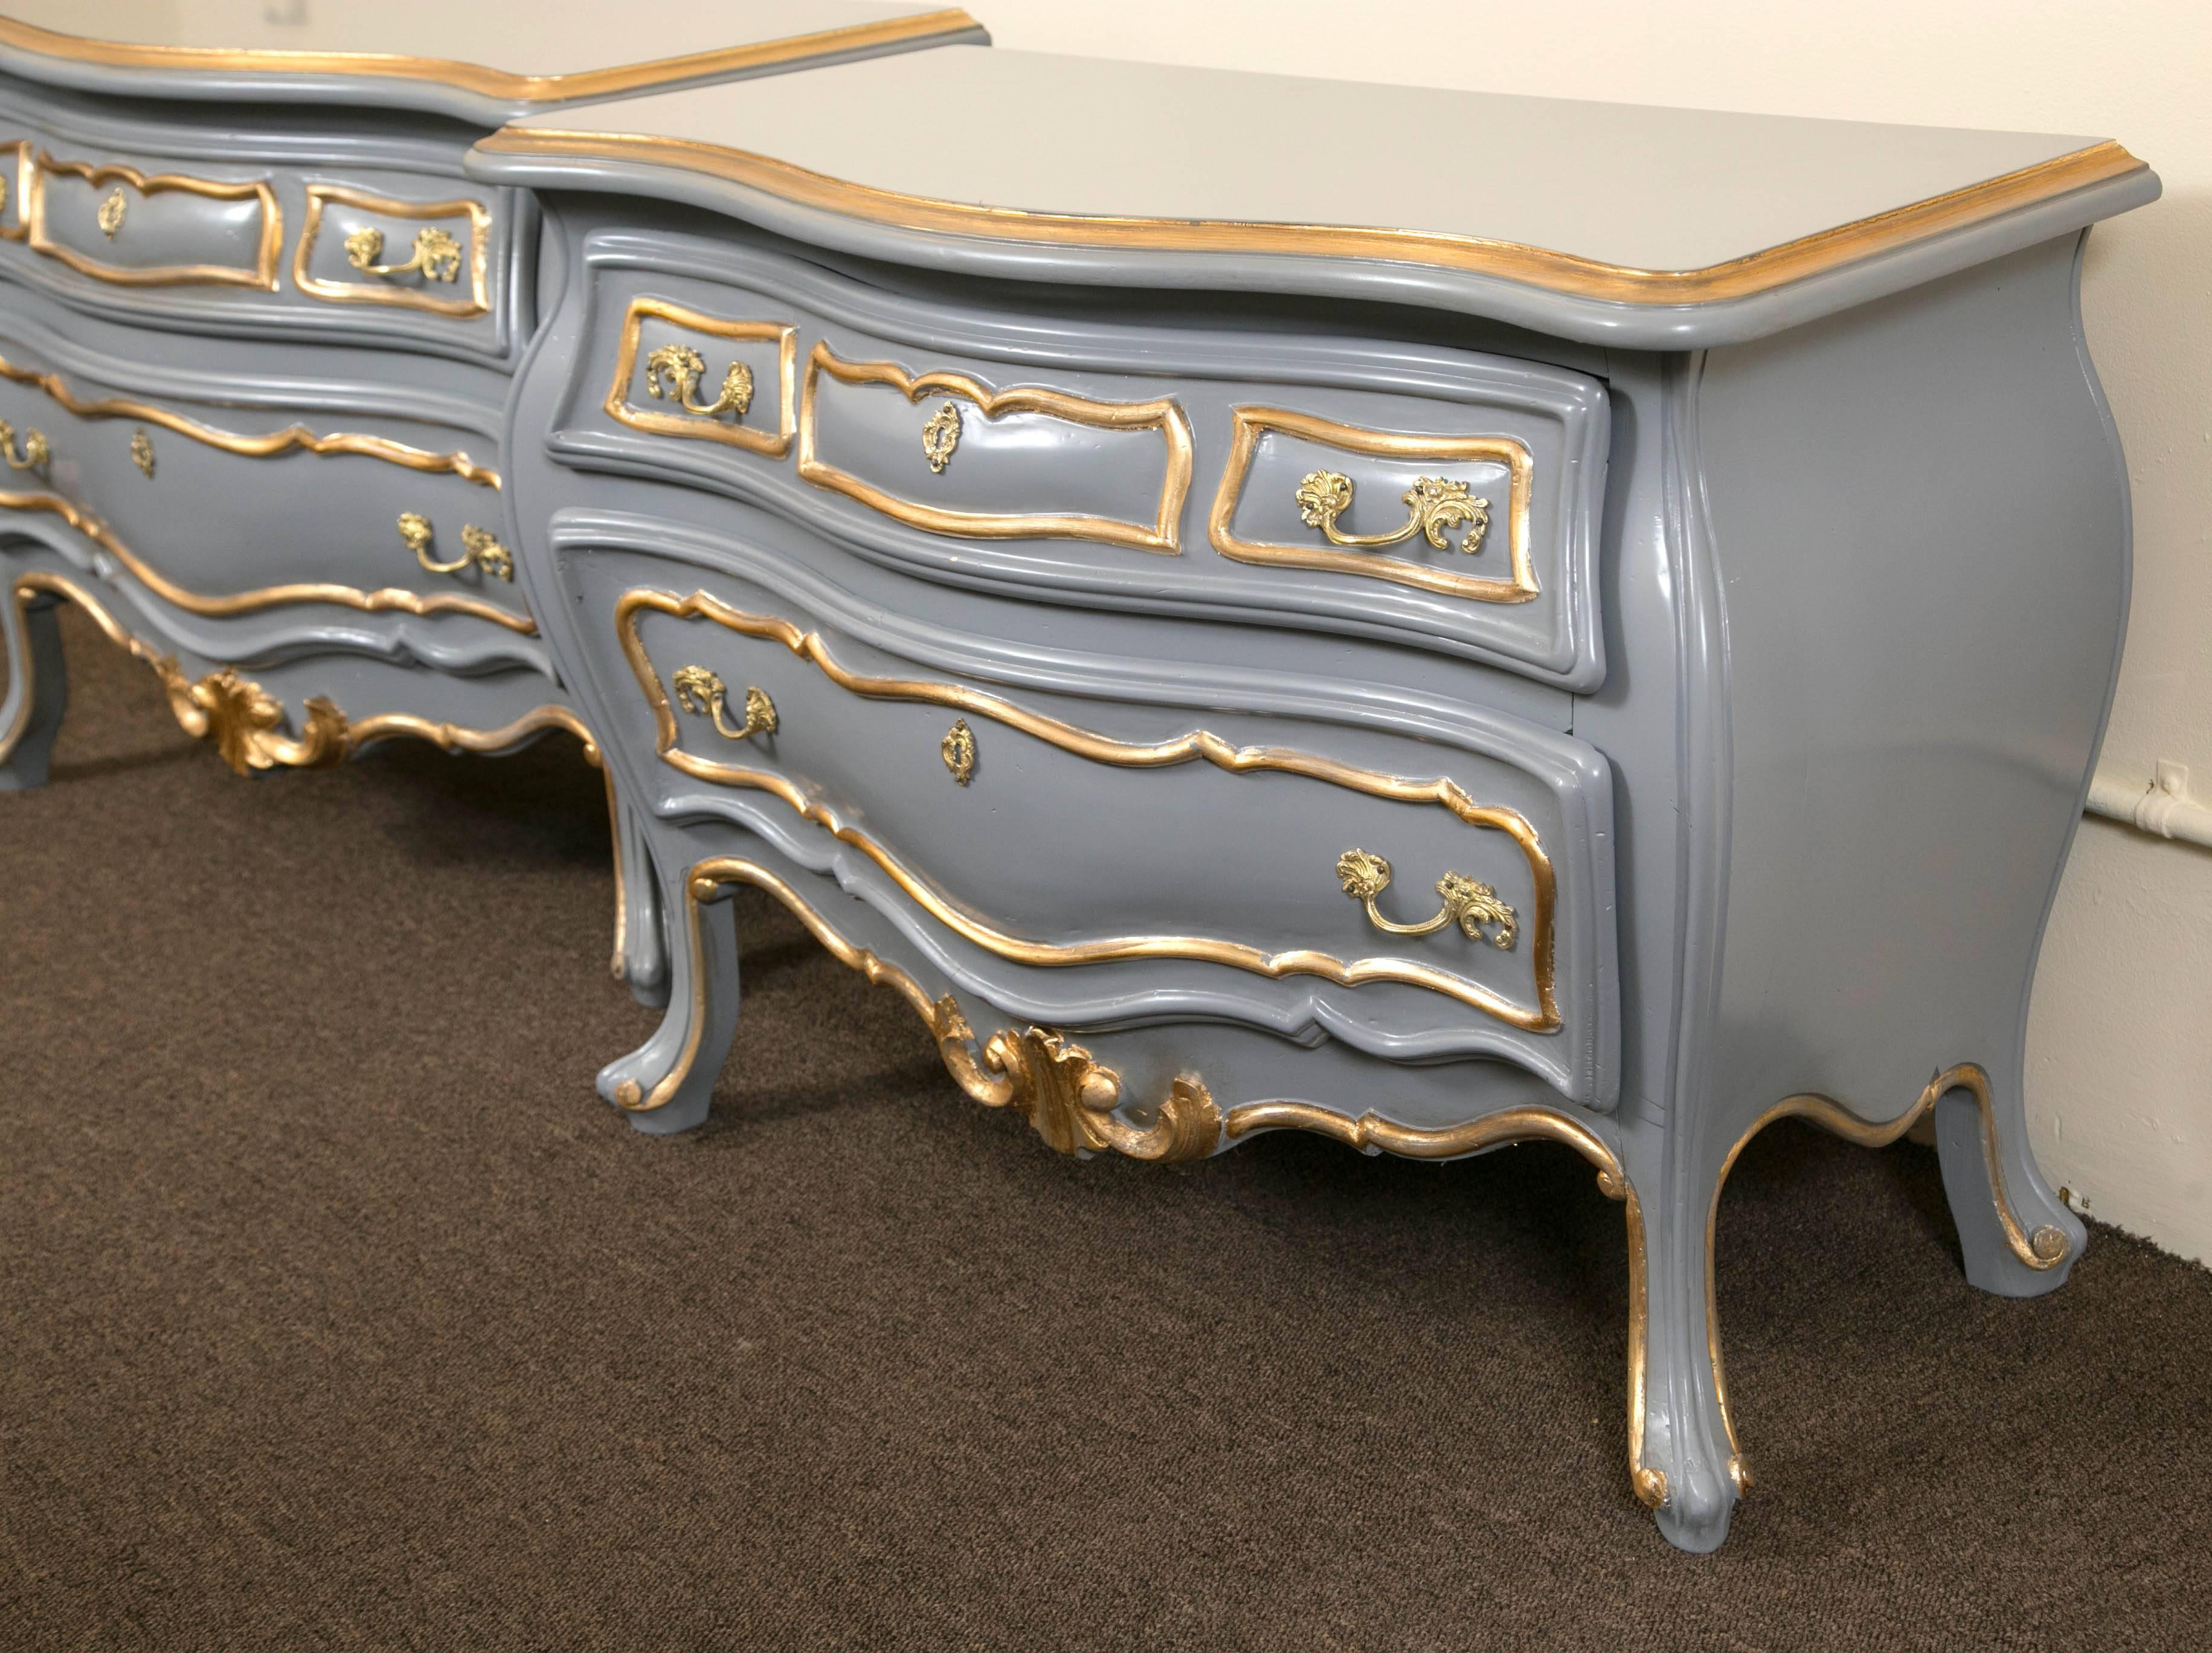 A fine Hollywood Regency pair of parcel paint and gilt decorated bombe commodes. These Louis XV style commodes or nightstands, each in a off gray color with gilt gold highlights. Bombe in form with two drawers having bronze pulls and key holes. The